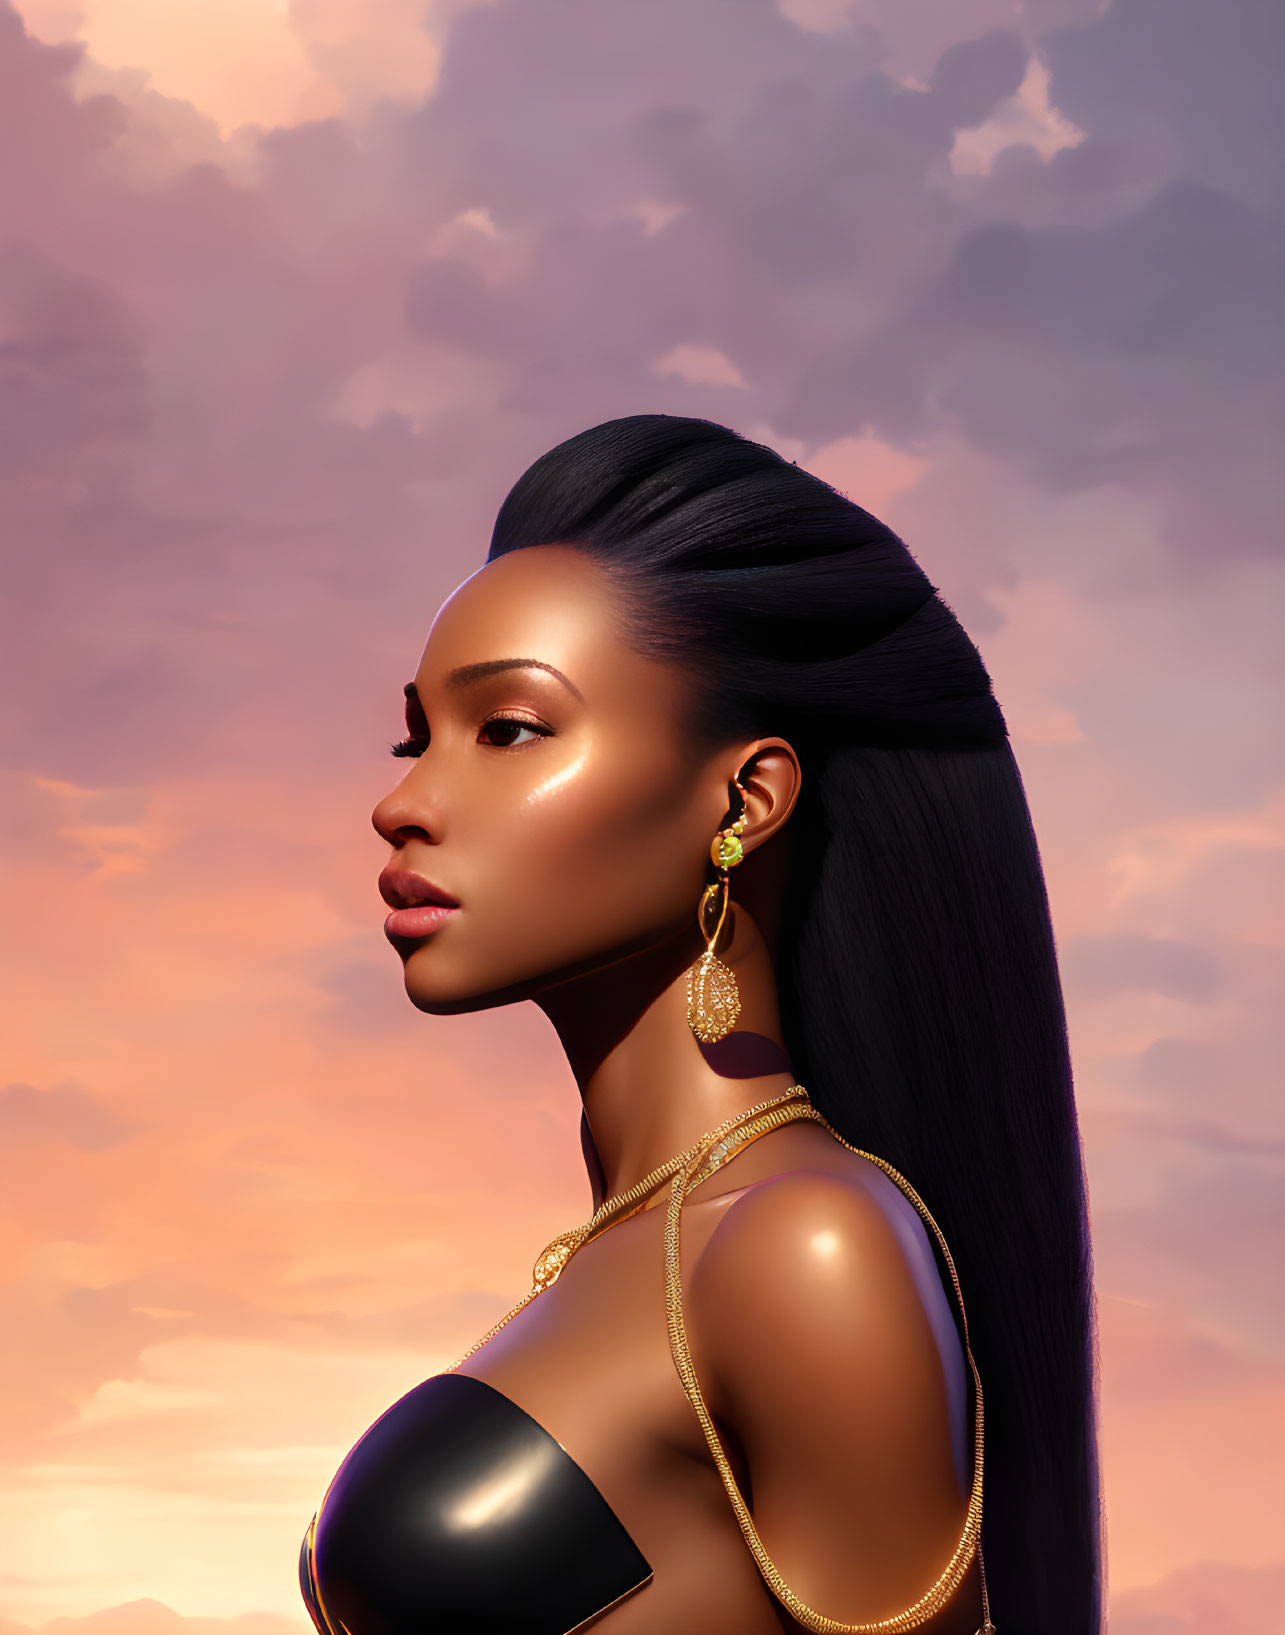 Woman with slicked-back hair and gold attire in sunset sky digital illustration